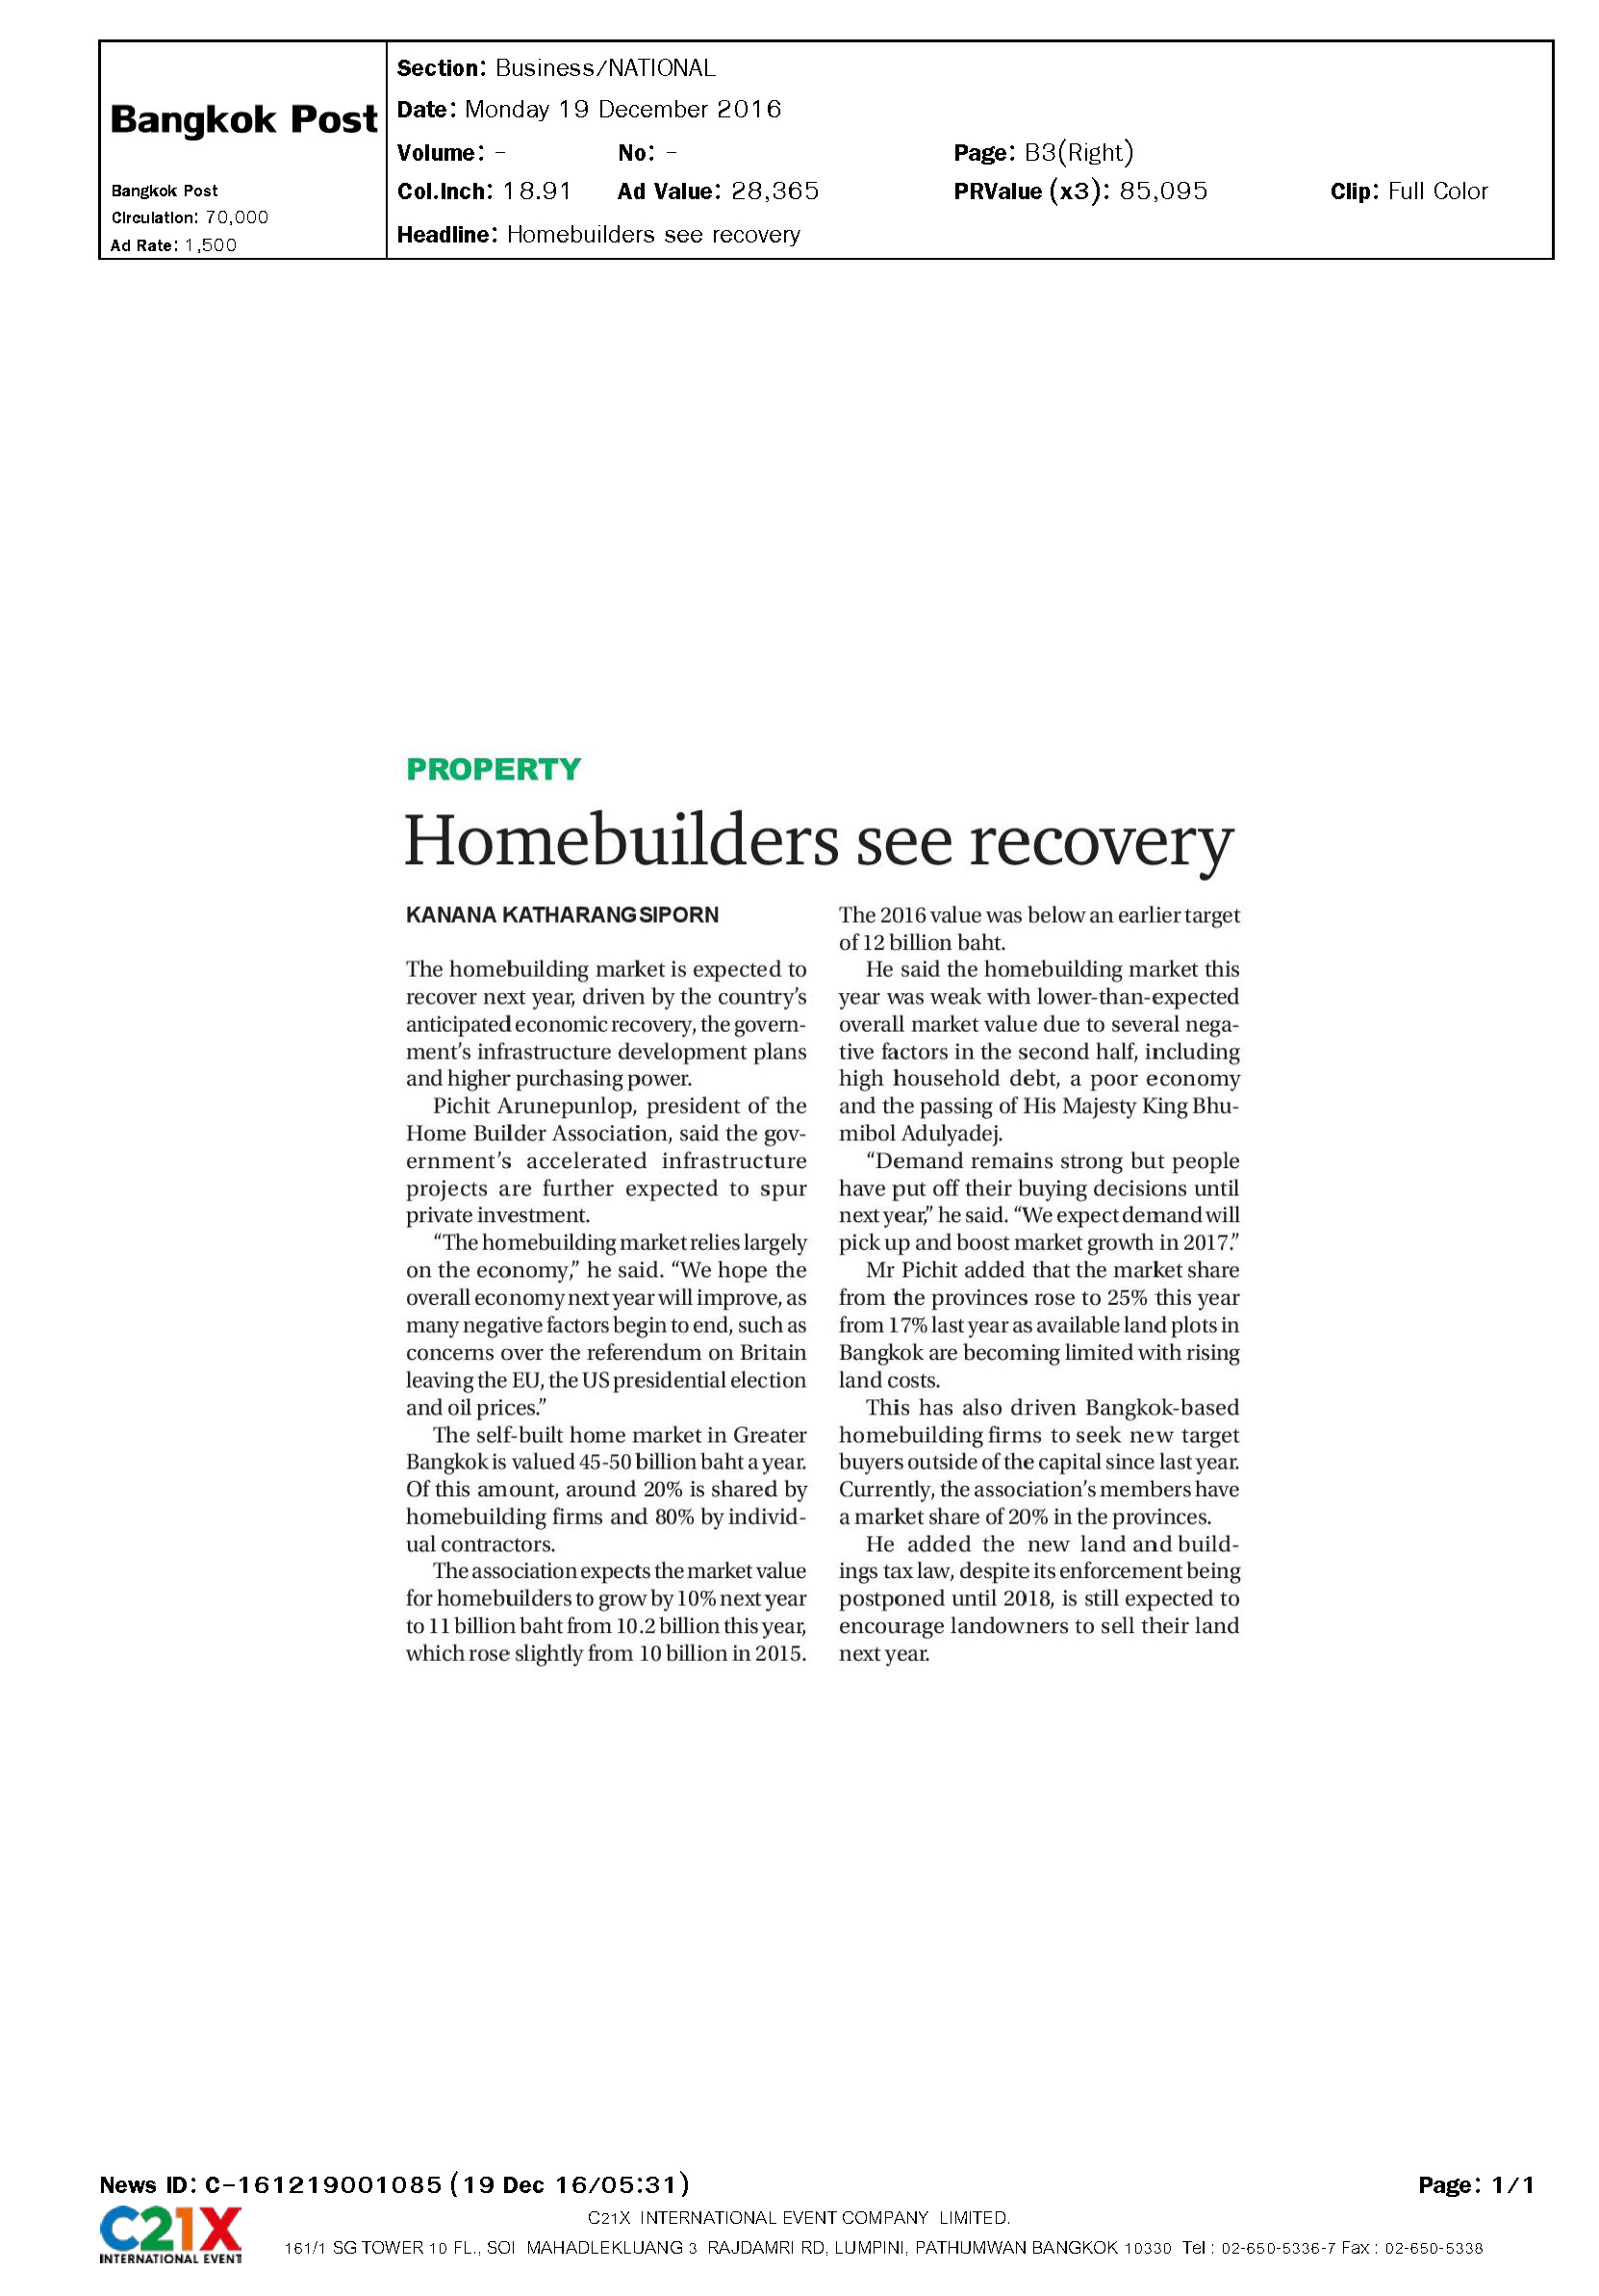 Home Builders see recovery